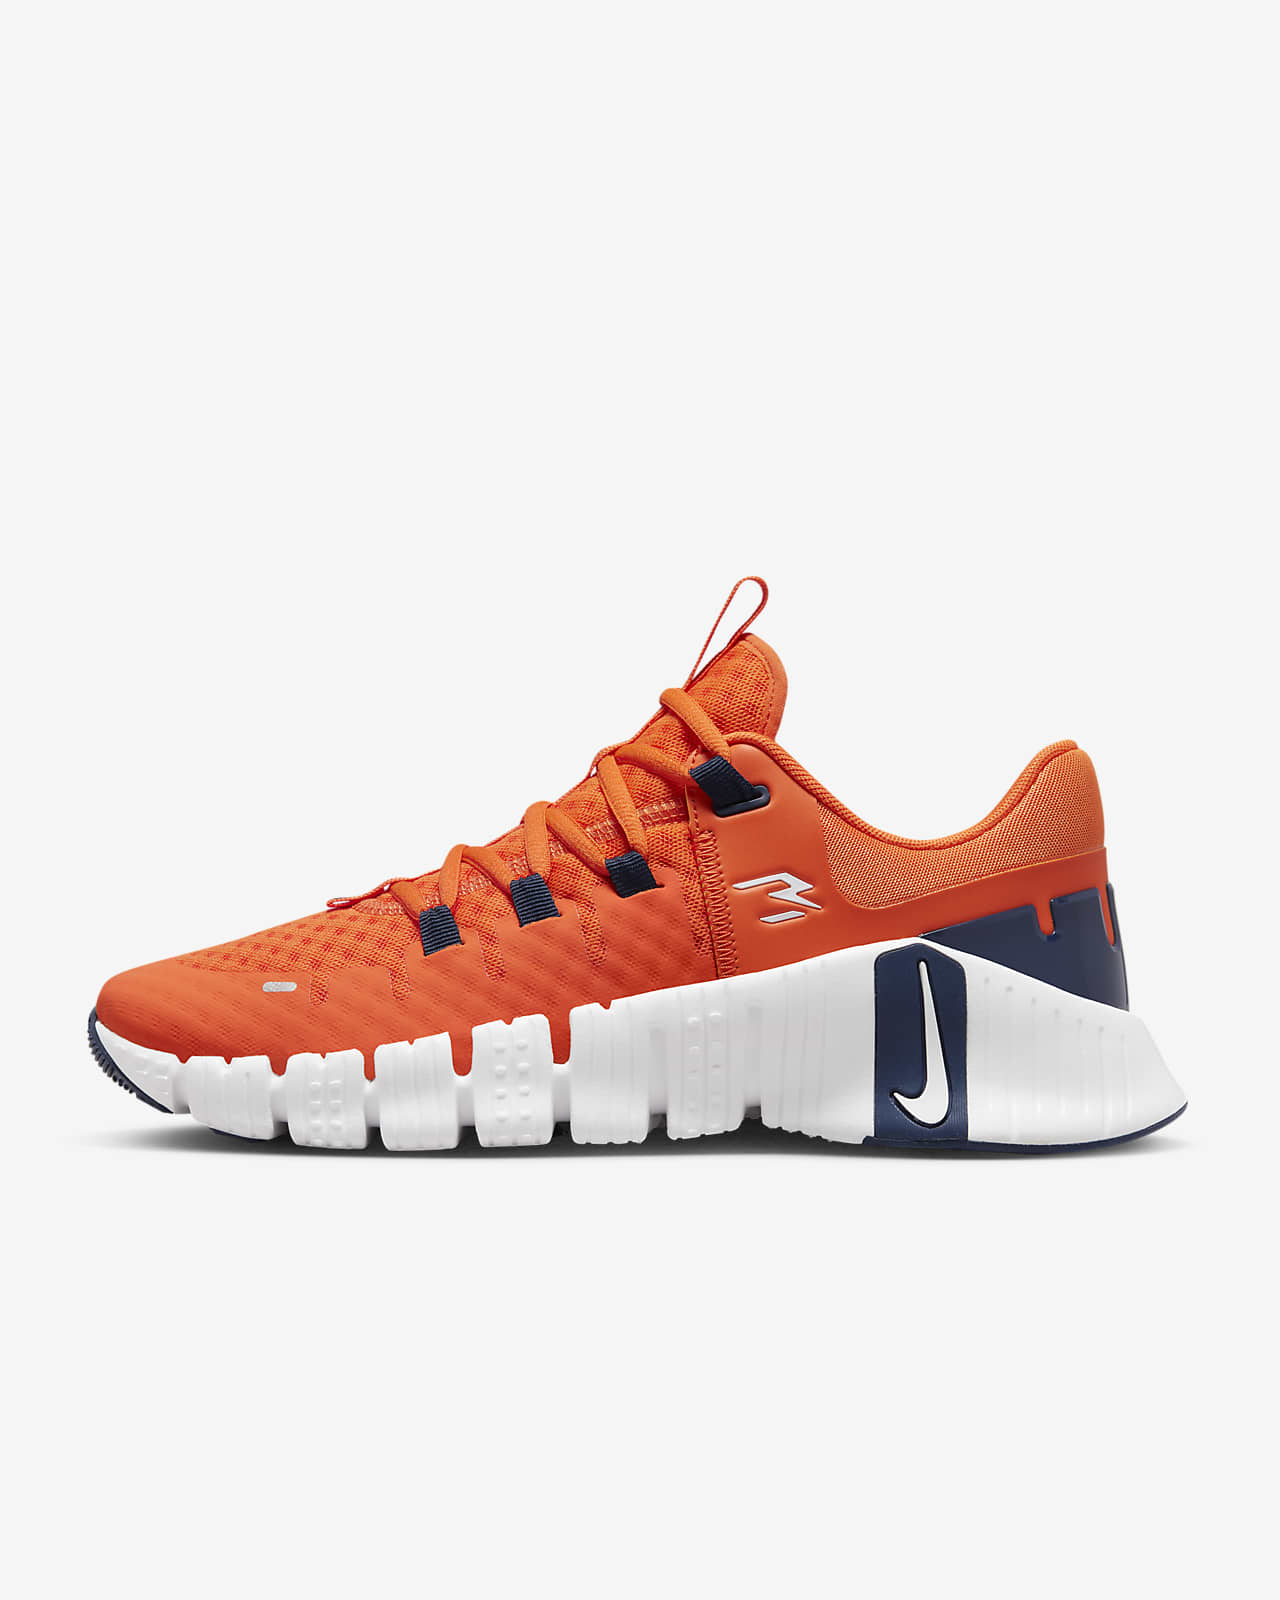 Nike Free Metcon 5 Mens Shoes Review